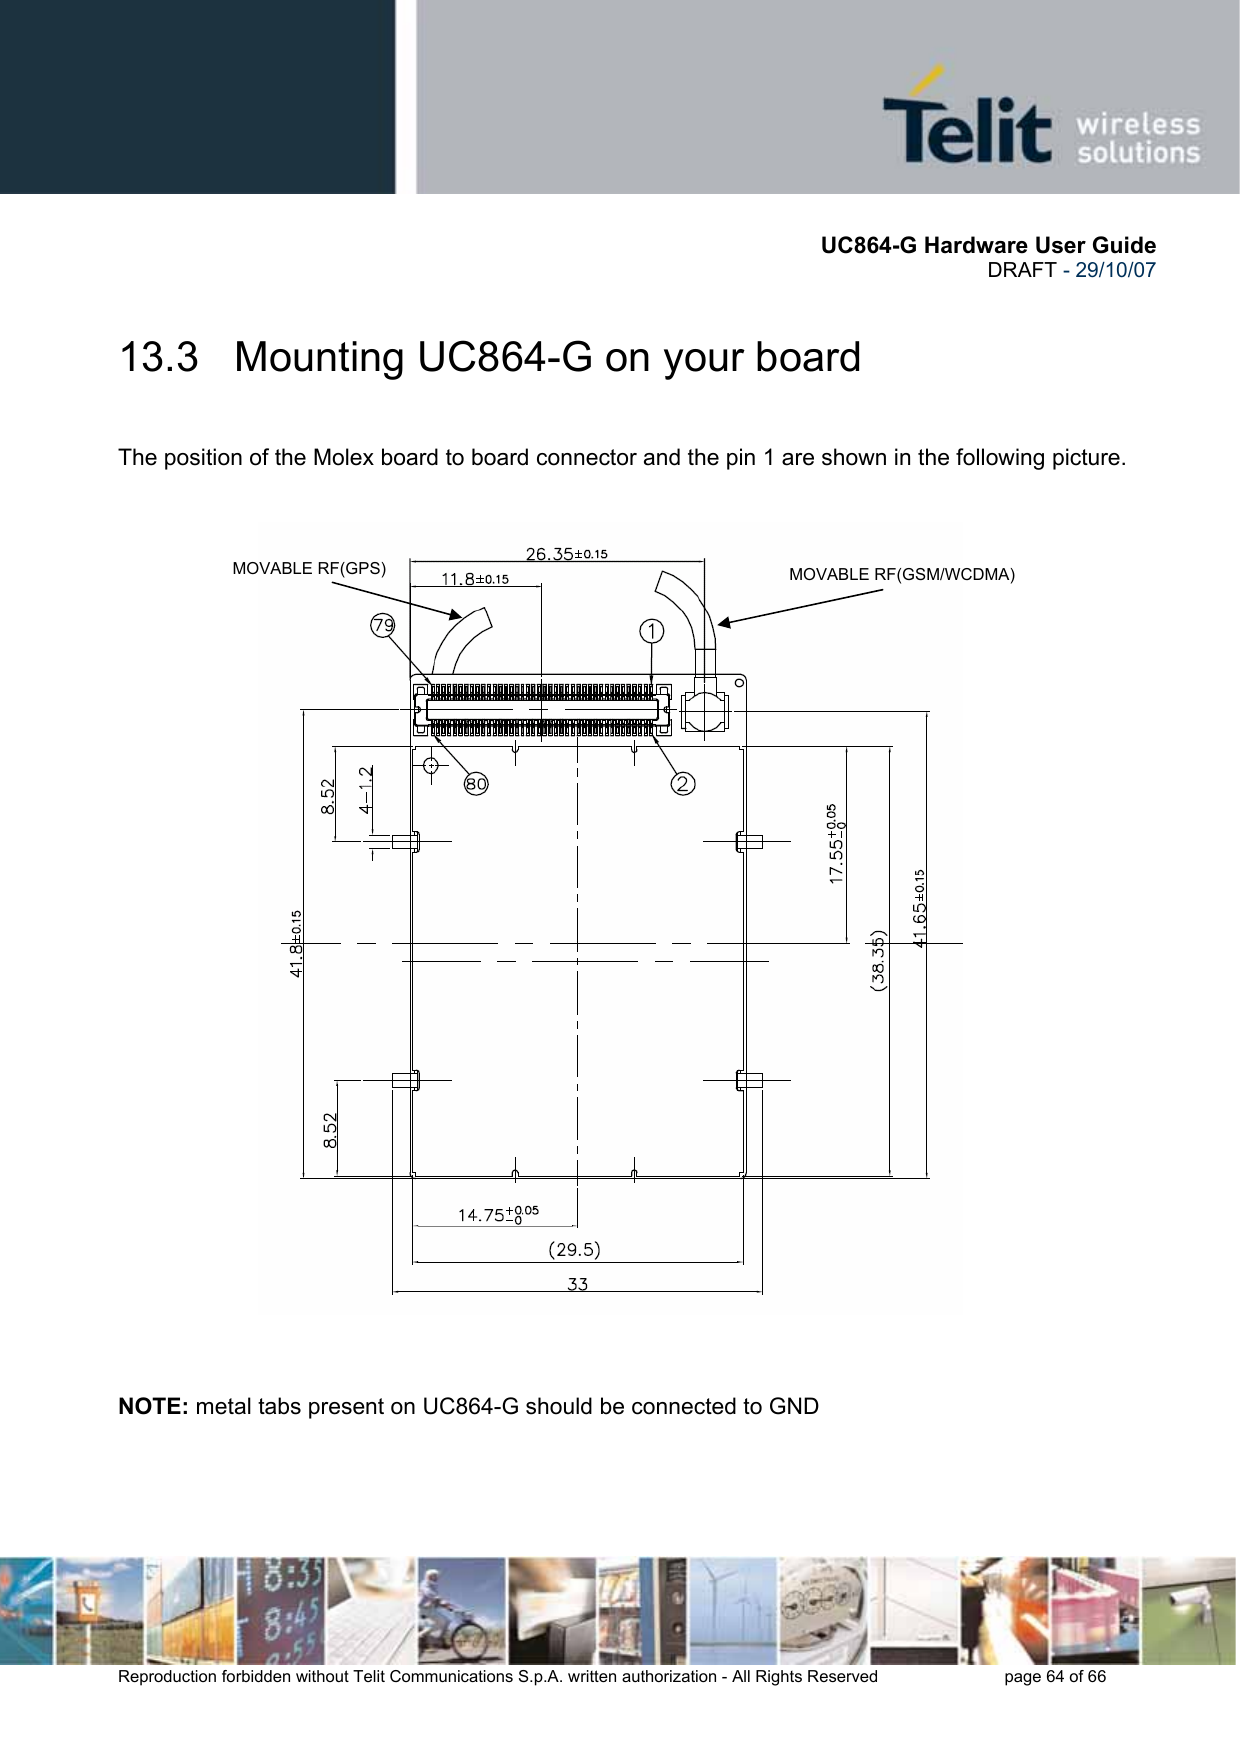       UC864-G Hardware User Guide  DRAFT - 29/10/07      Reproduction forbidden without Telit Communications S.p.A. written authorization - All Rights Reserved    page 64 of 66  13.3   Mounting UC864-G on your board  The position of the Molex board to board connector and the pin 1 are shown in the following picture.     NOTE: metal tabs present on UC864-G should be connected to GND   MOVABLE RF(GSM/WCDMA) MOVABLE RF(GPS) 